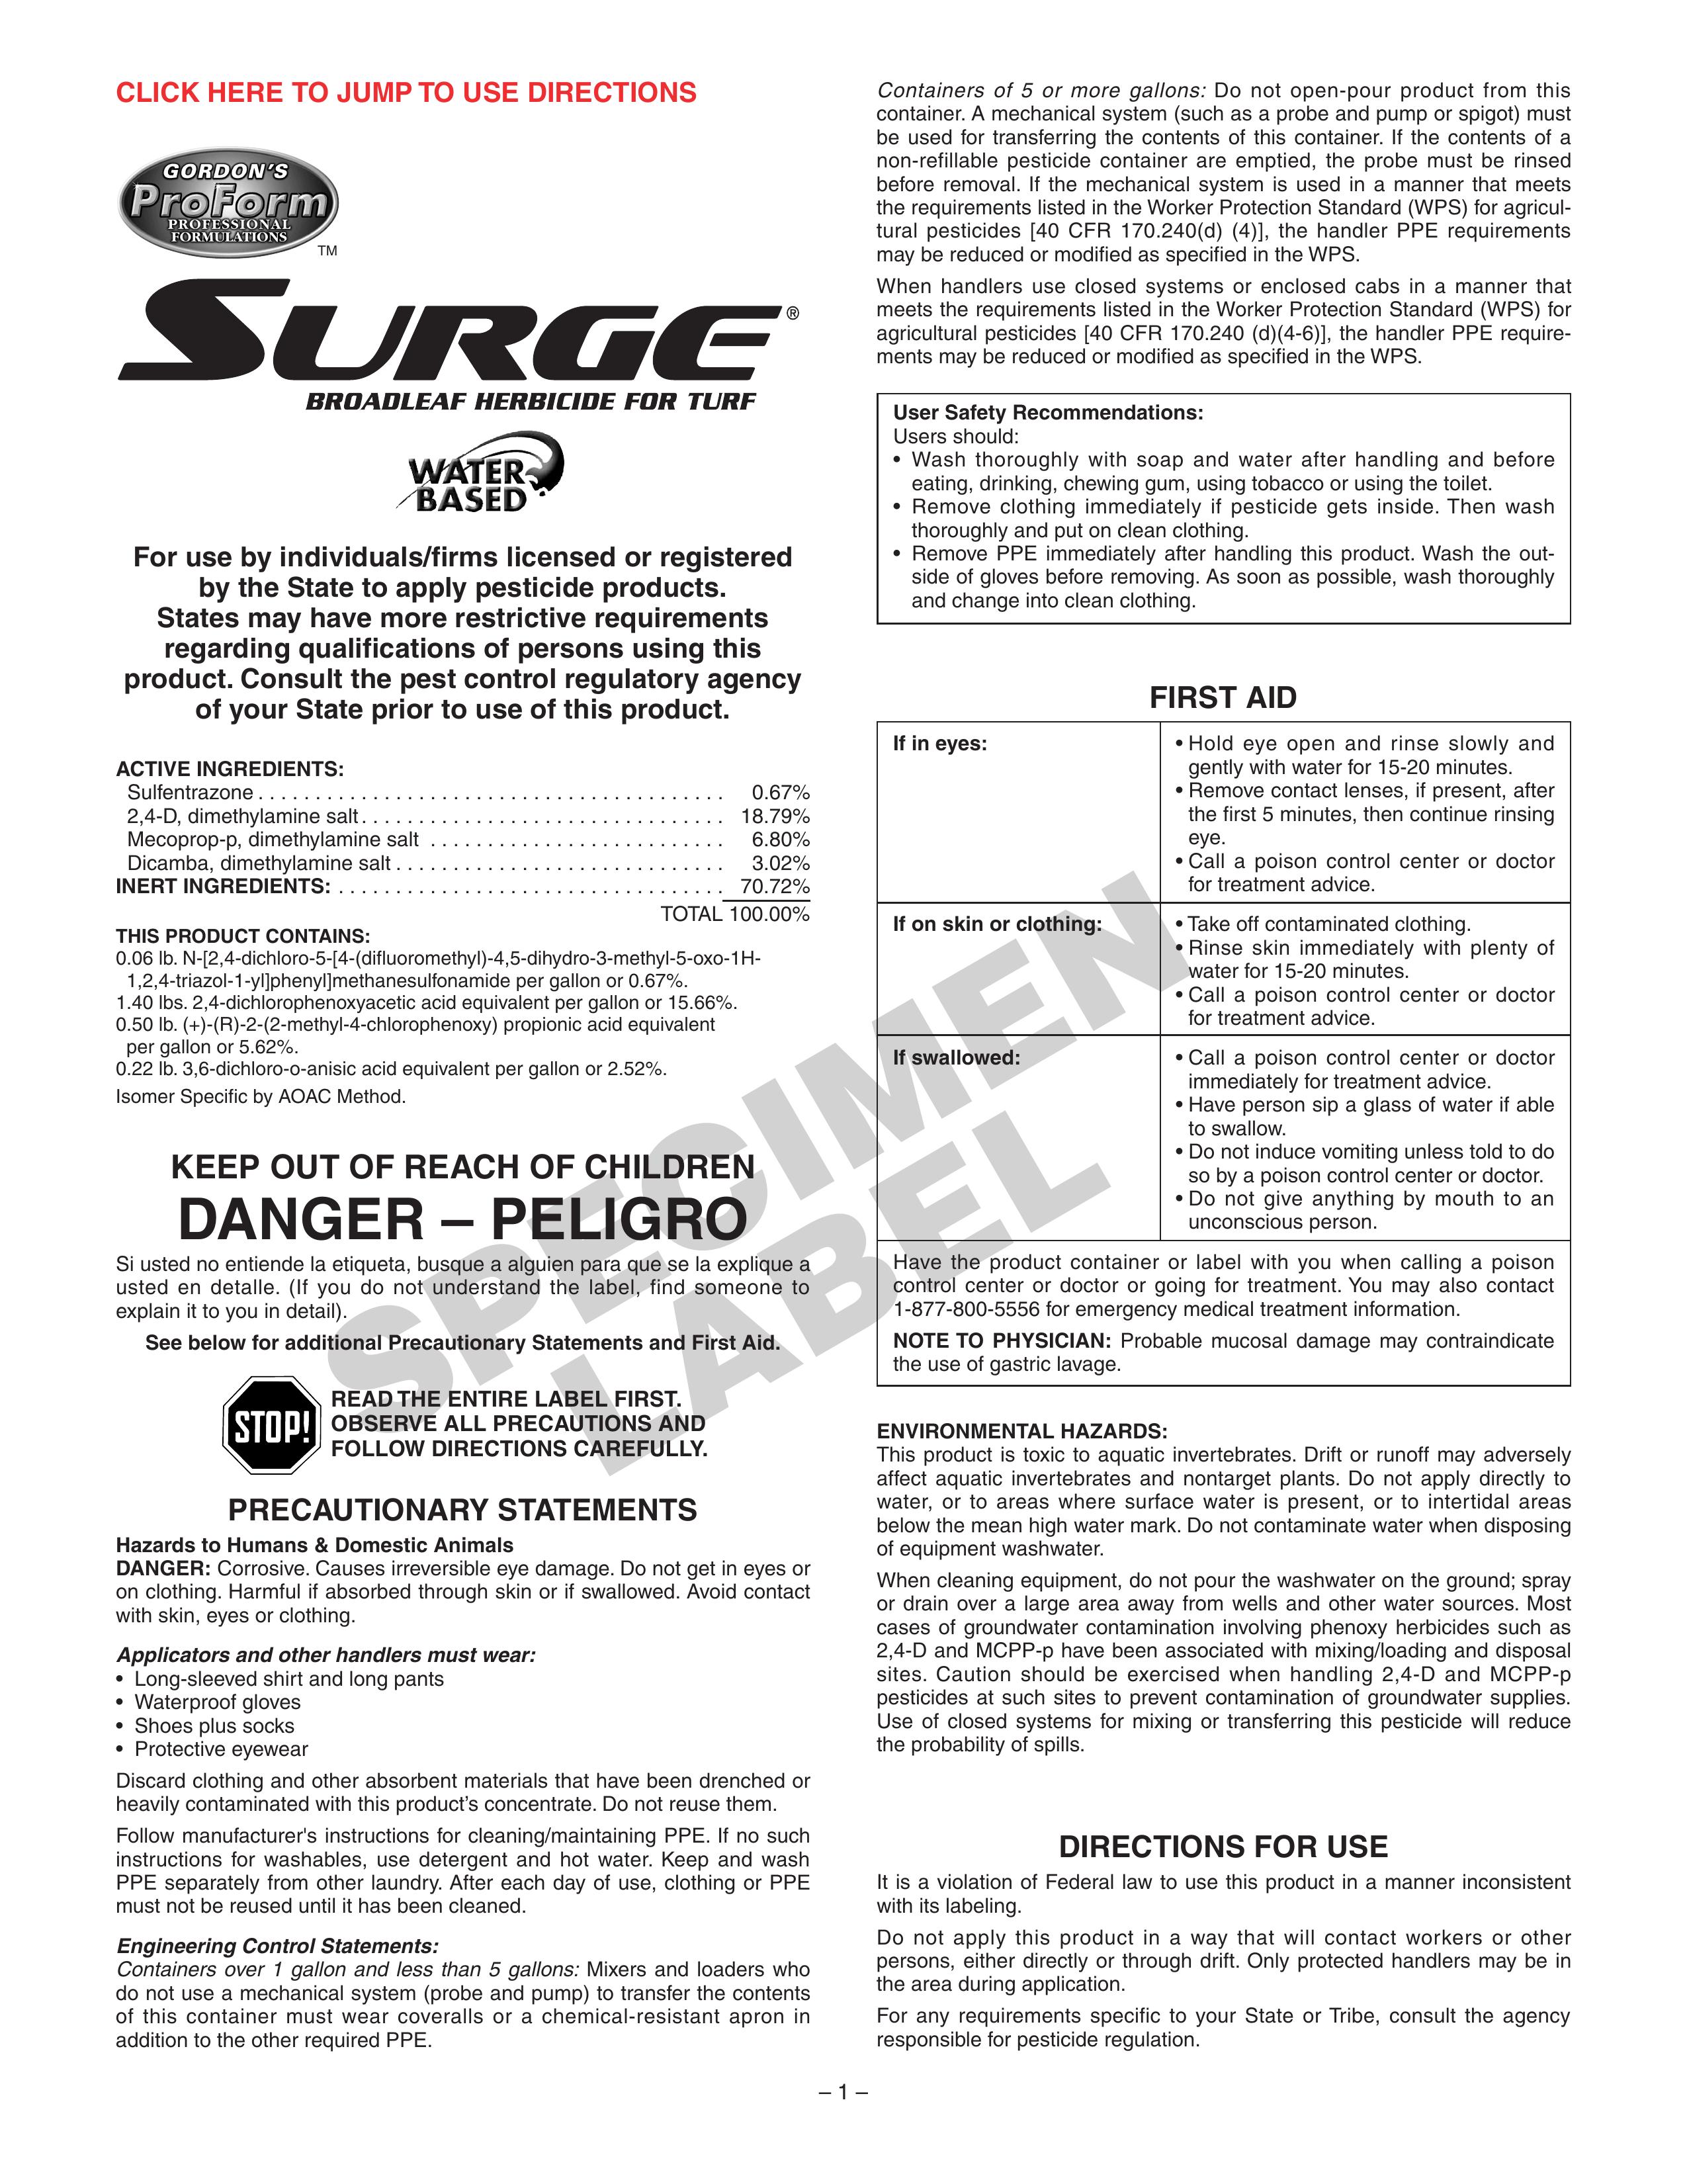 Surge Water Broadleaf Herbicide For Turf Insect Control Equipment User Manual